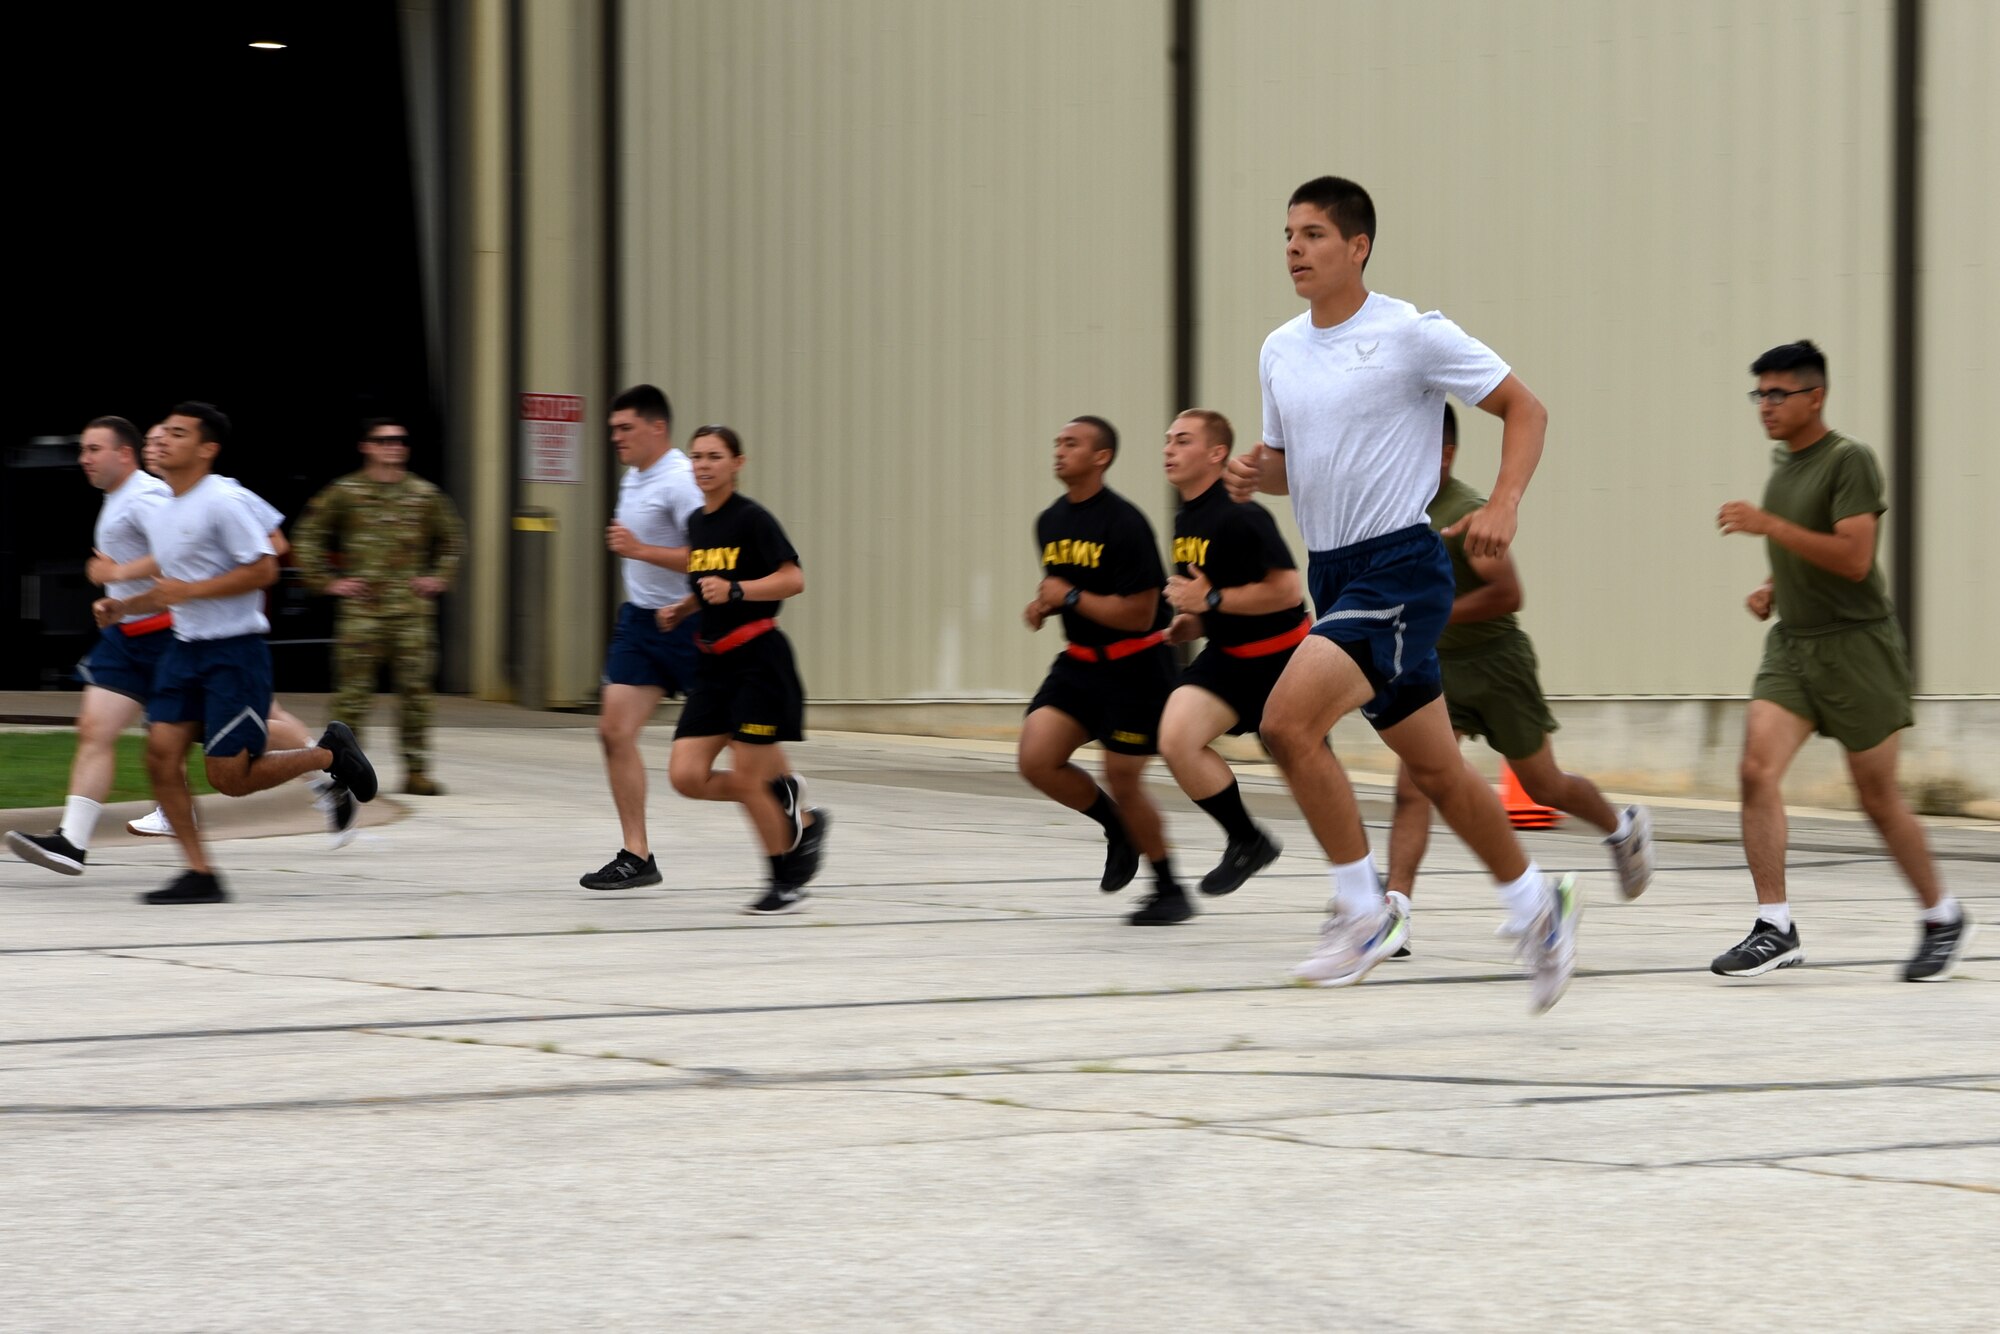 Joint service students assigned to the 312th Training Squadron run in a 20-meter pacer test for a medical evaluation, on Goodfellow Air Force Base, Texas, June 30, 2021. Goodfellow’s Human Performance Team conducted several tests on the new students to mitigate training mishaps. (U.S. Air Force photo by Senior Airman Abbey Rieves)